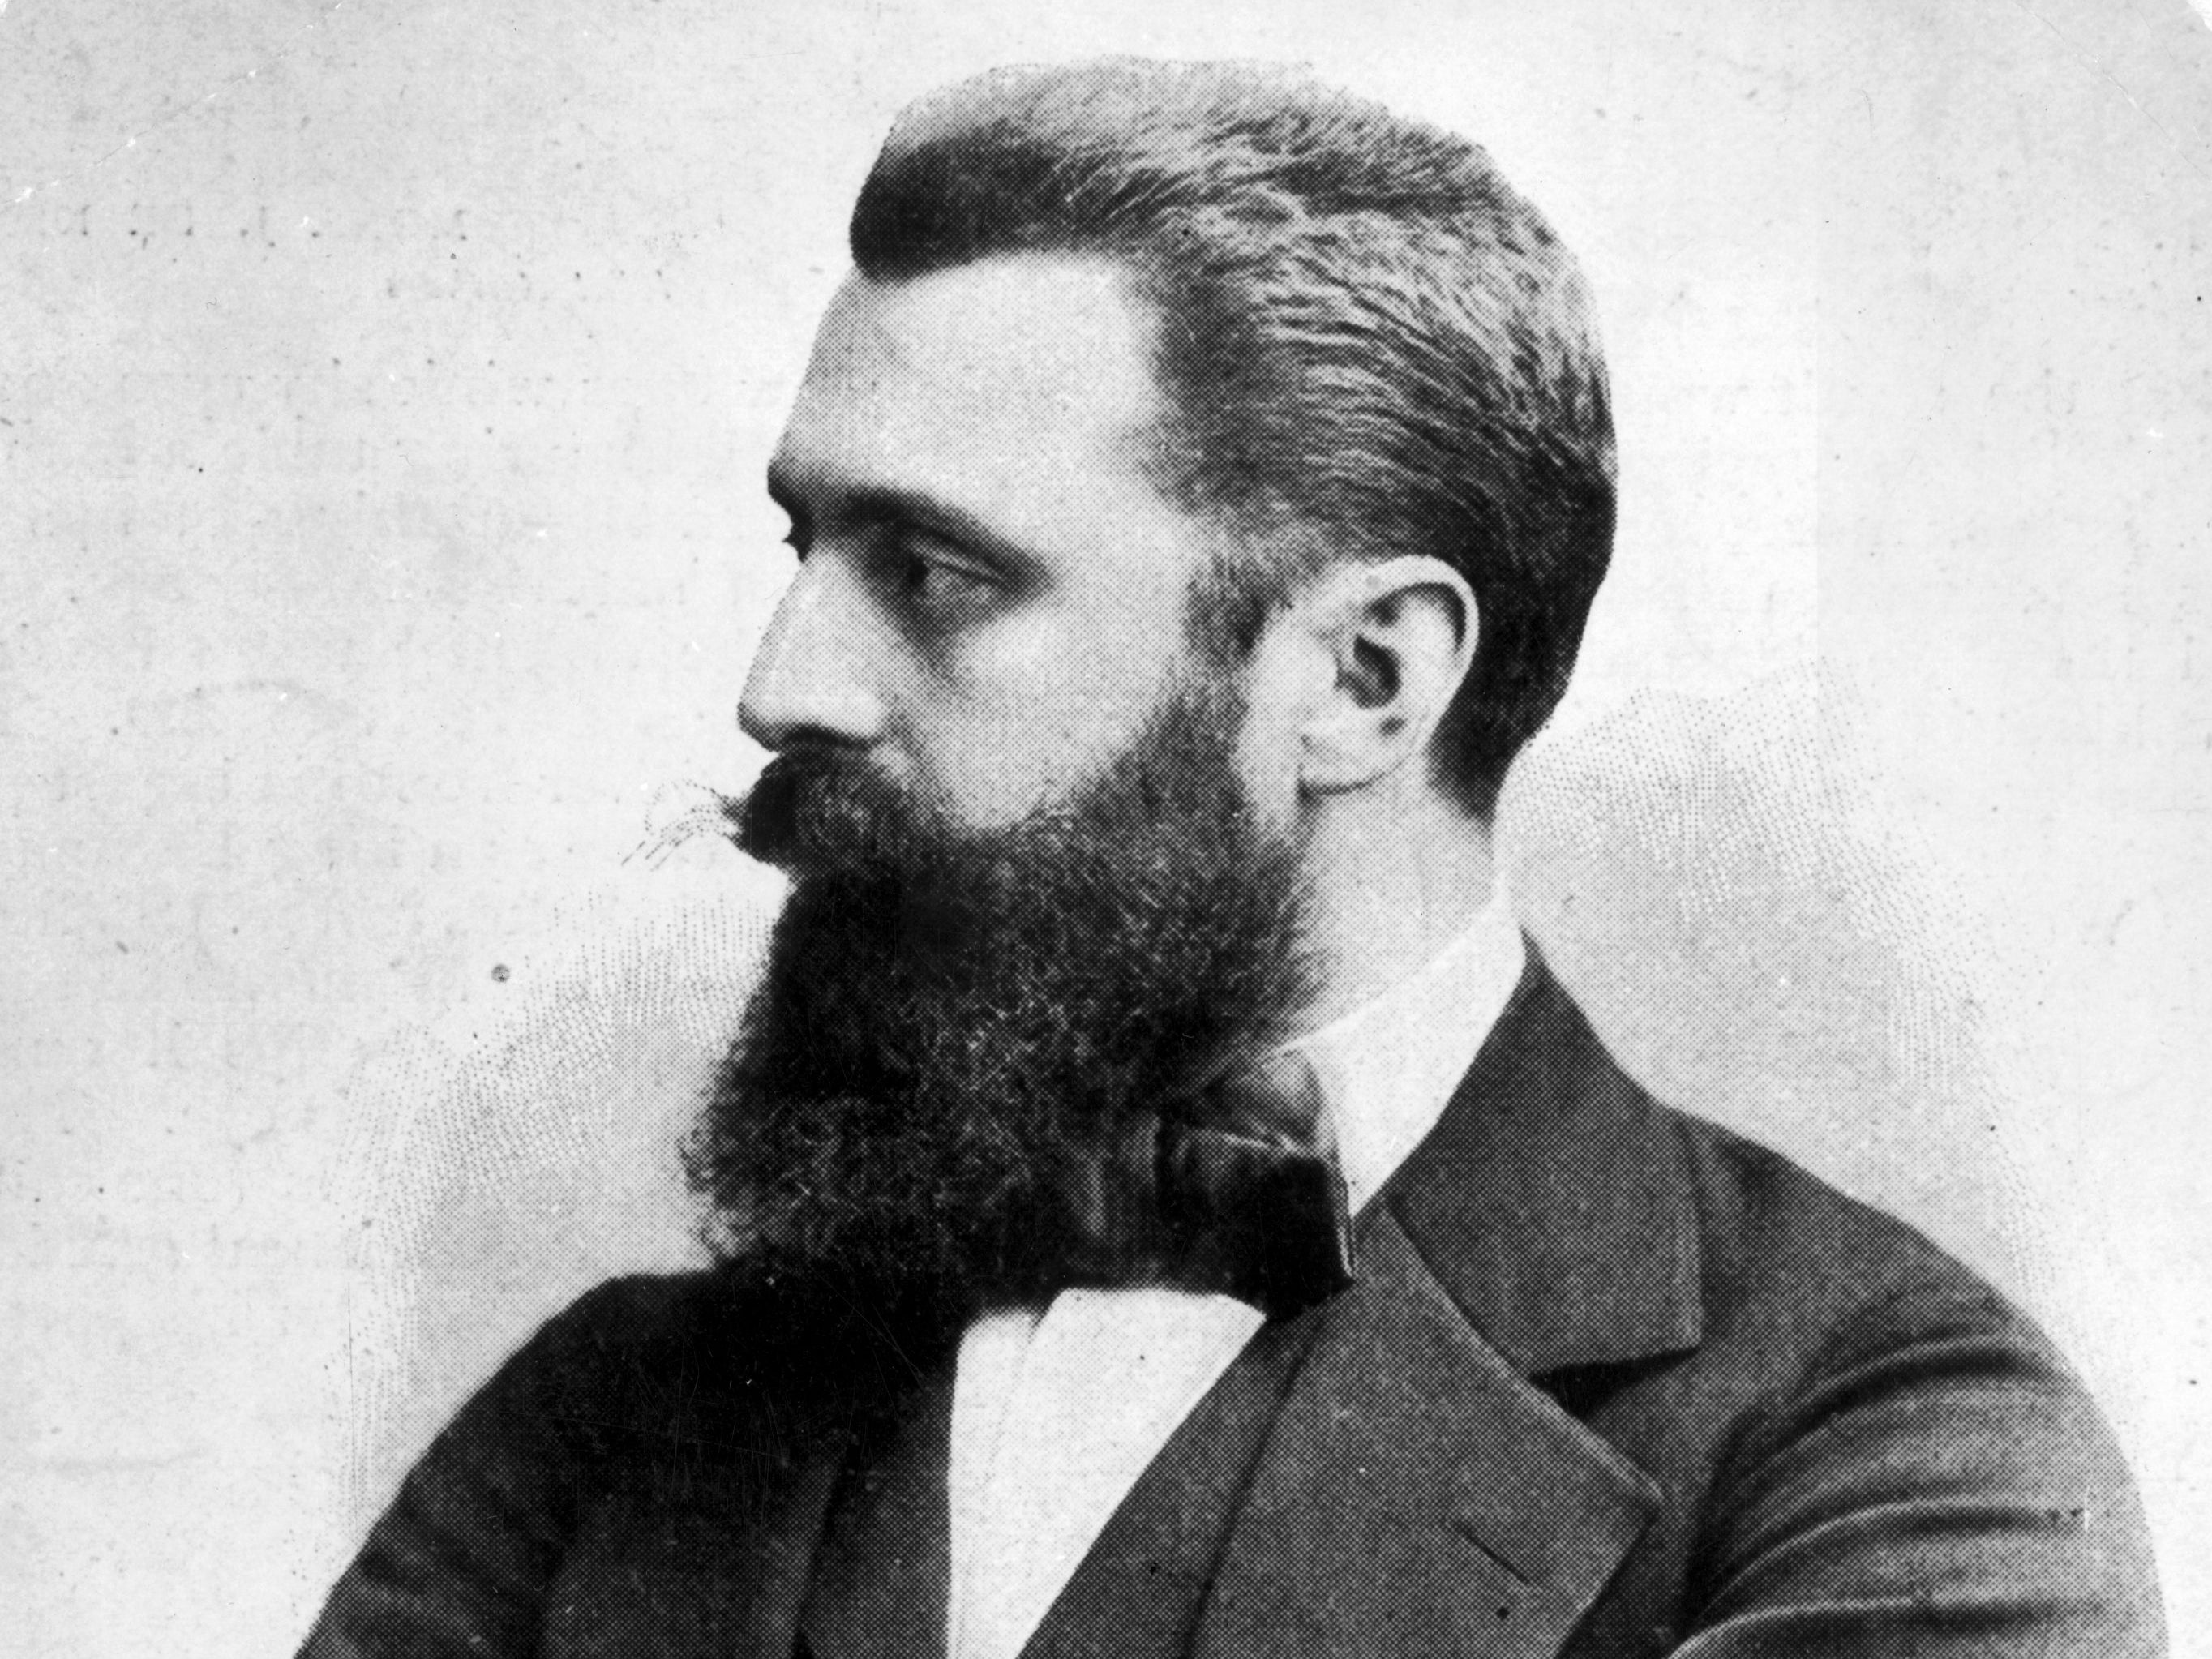 Austro-Hungarian journalist Dr Theodor Herzl who wrote The Jewish State advocating a nation in Palestine